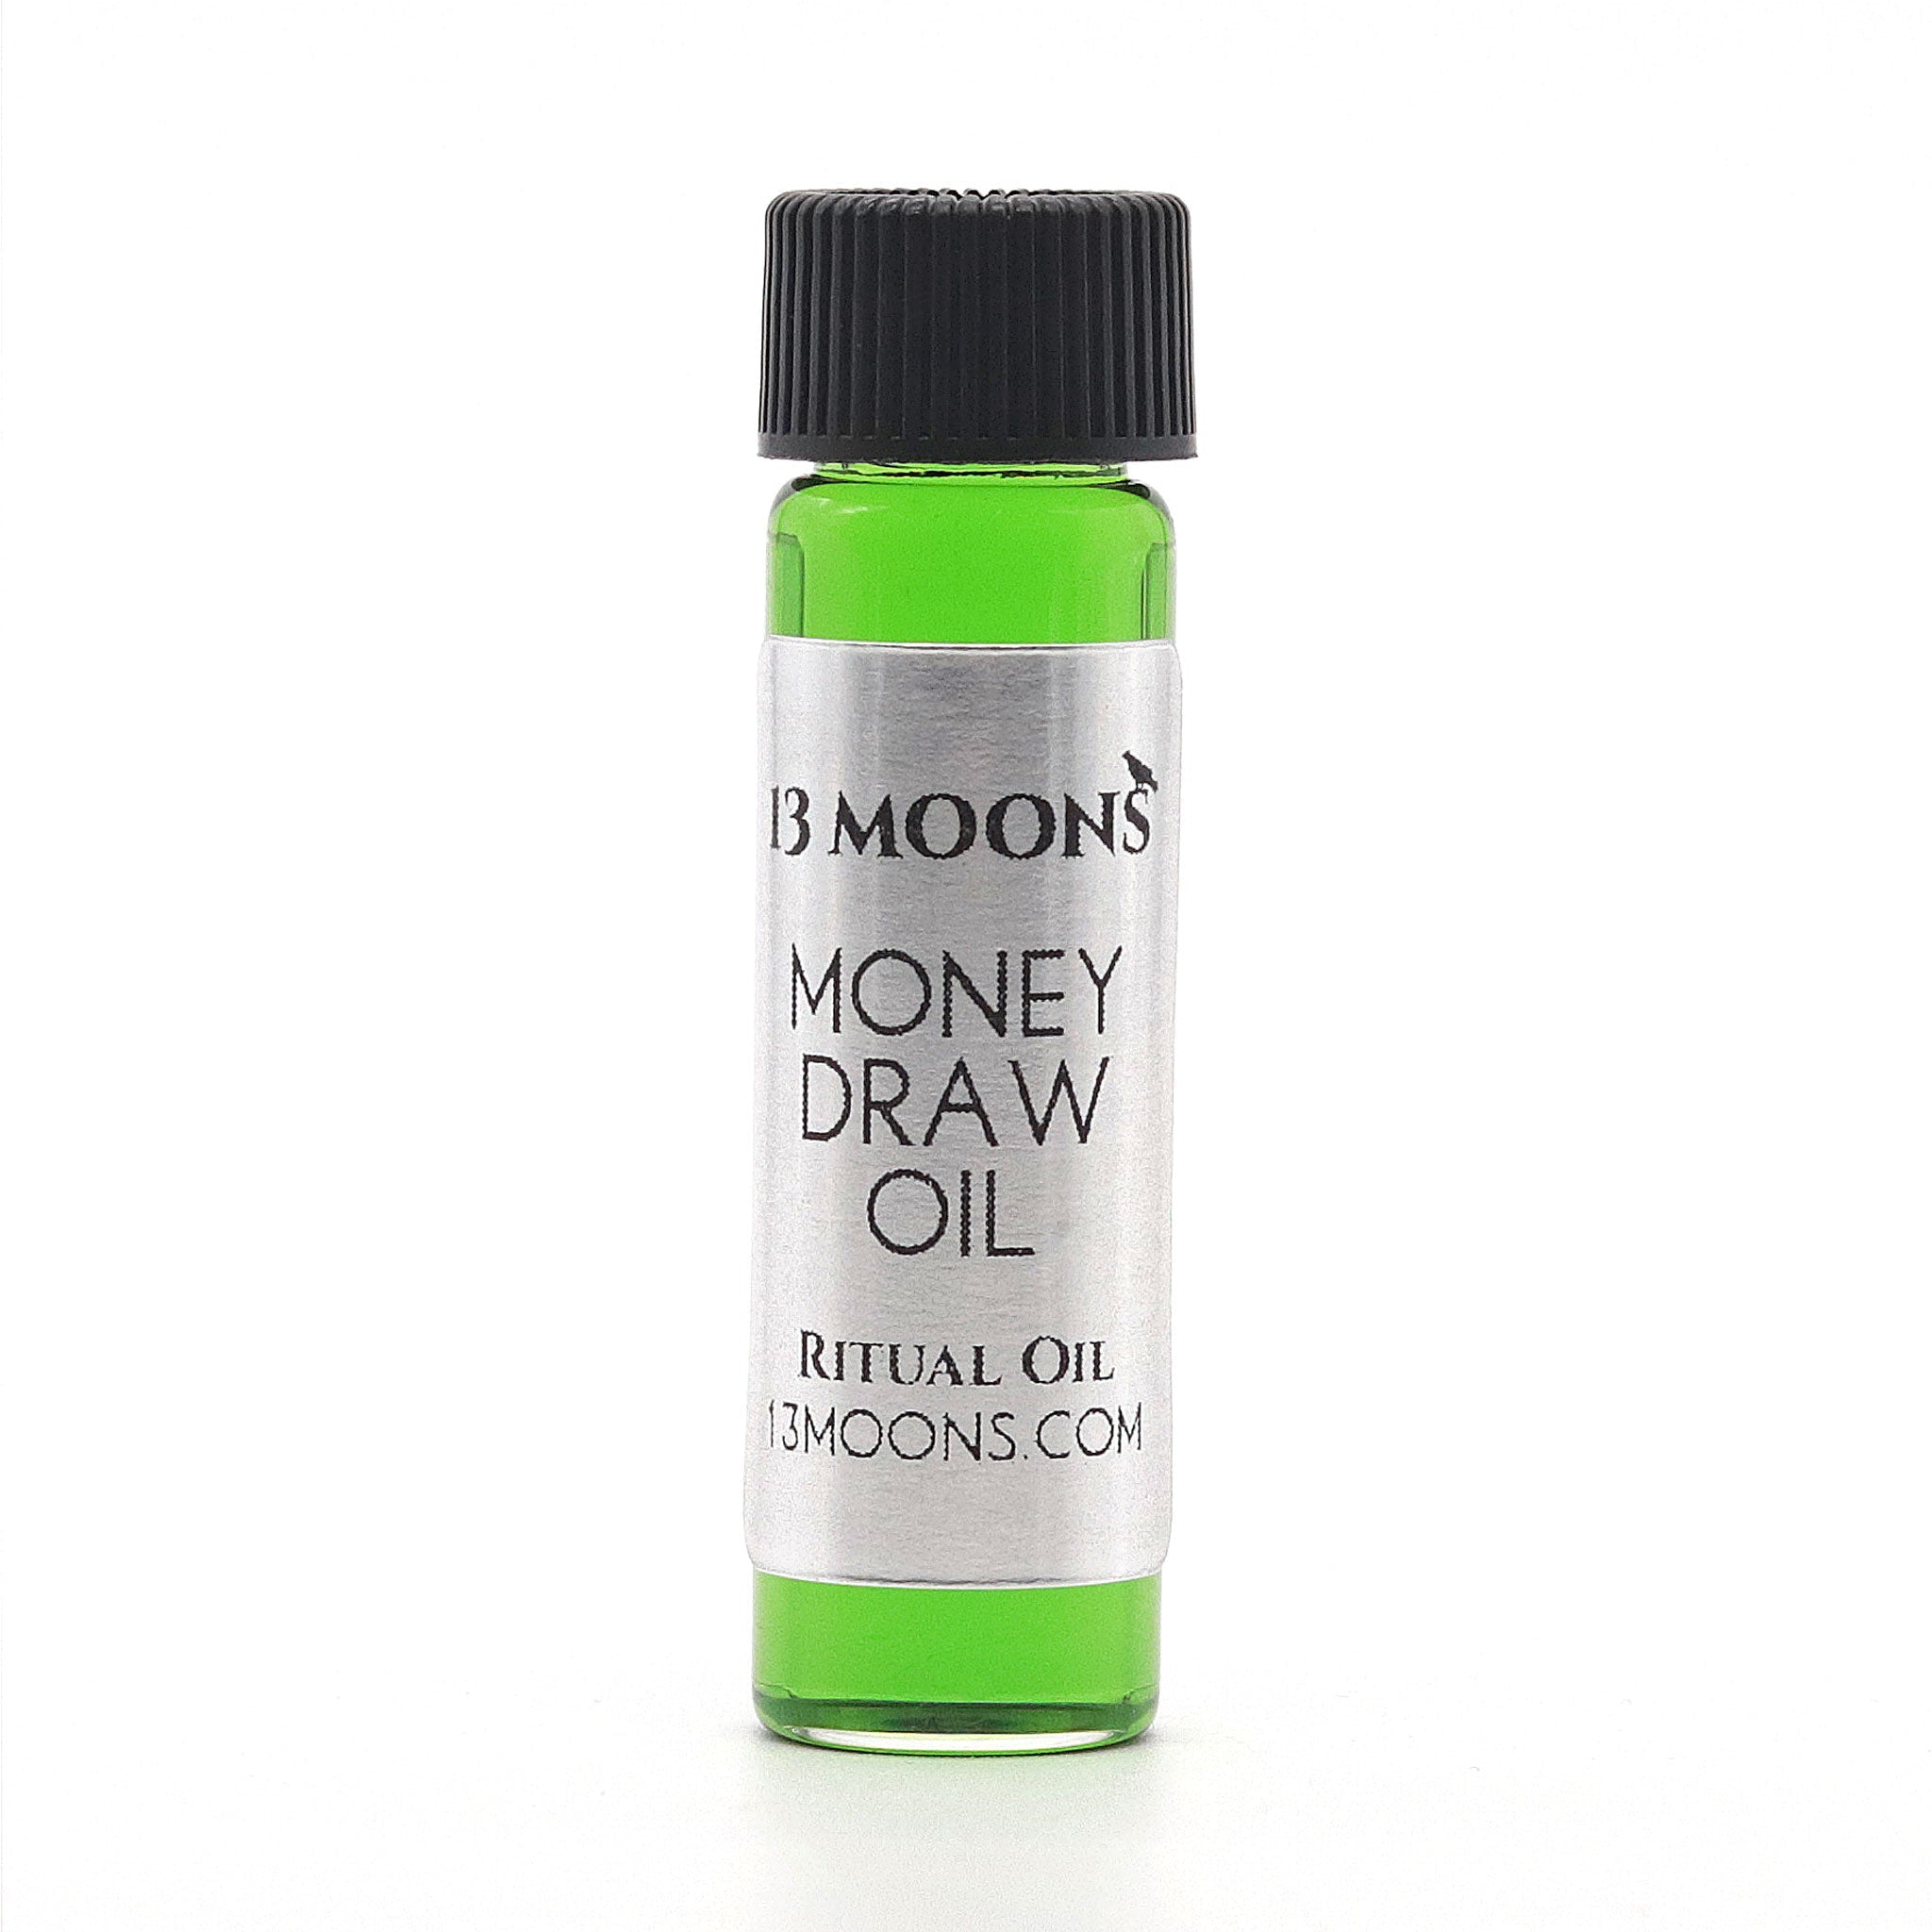 Show Me the Money! Oil Set by 13 Moons - 13 Moons